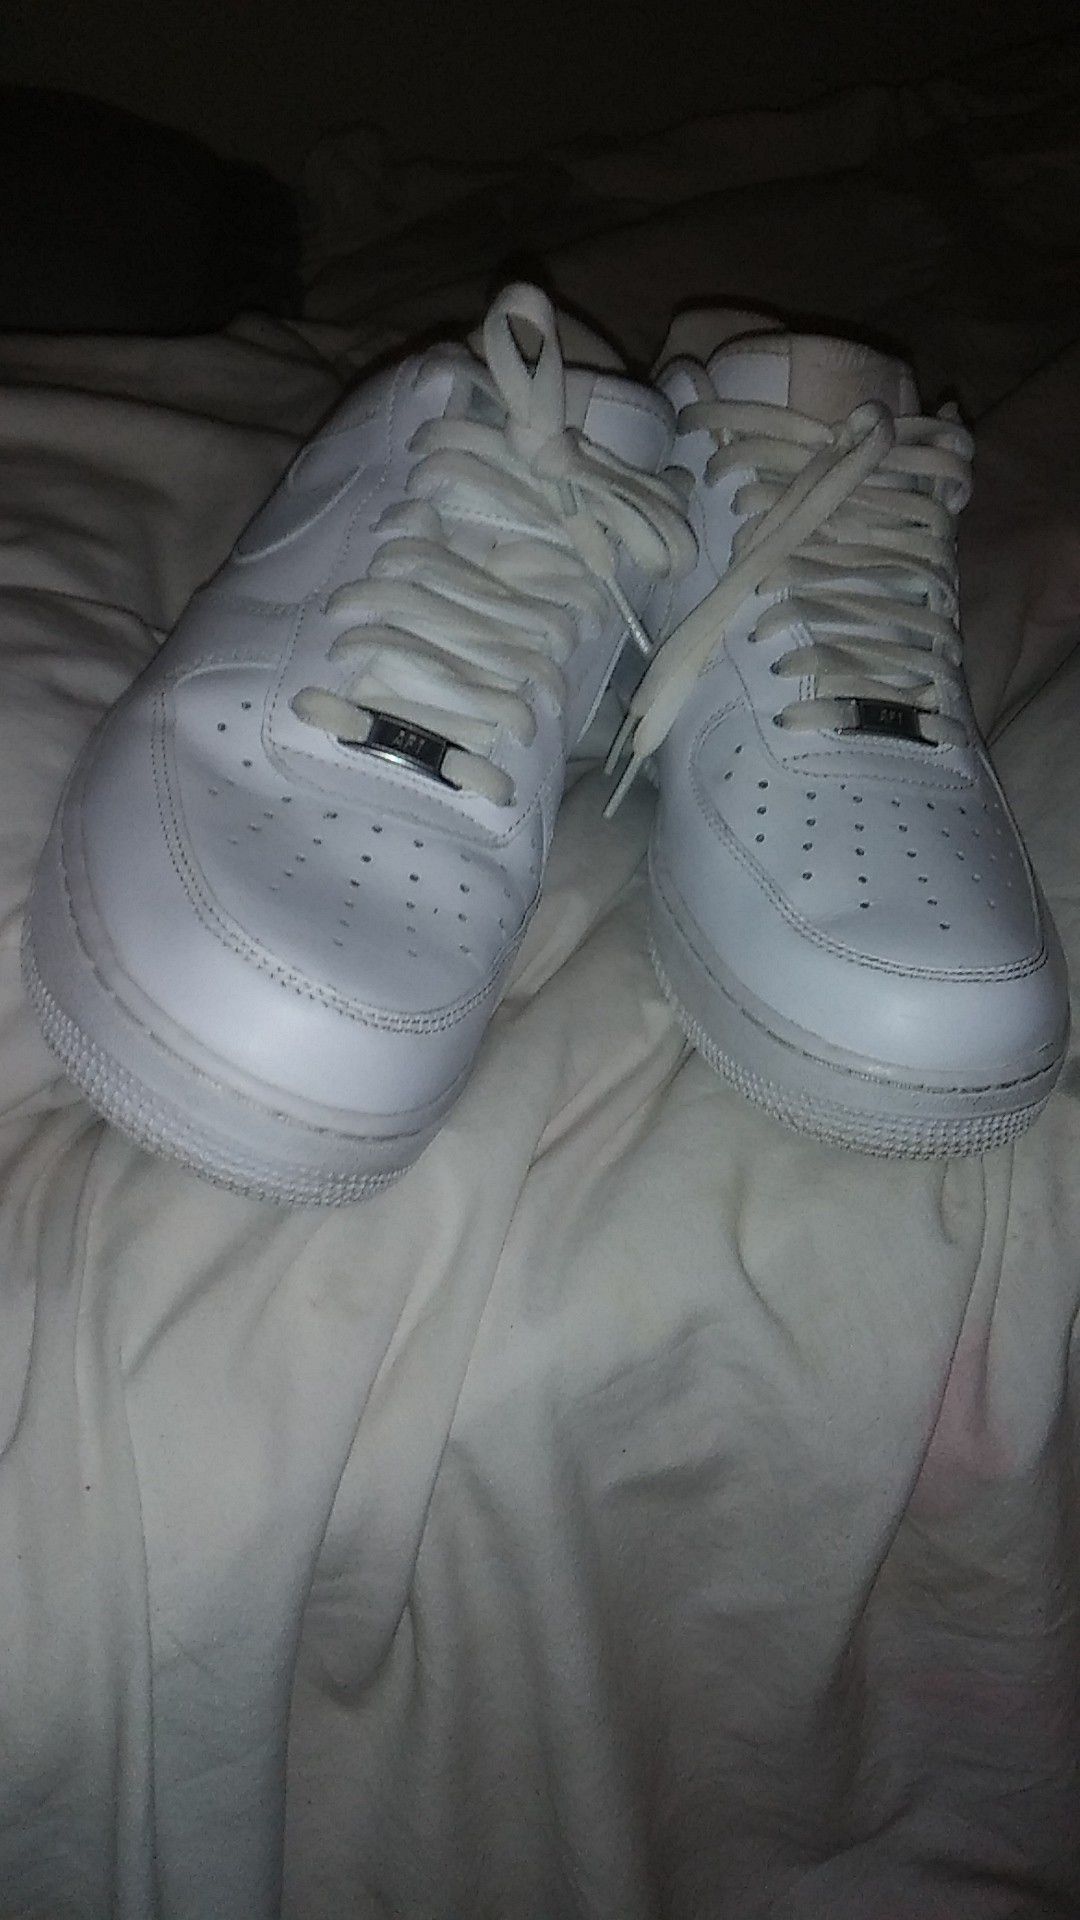 White Air Force Ones size 11 used